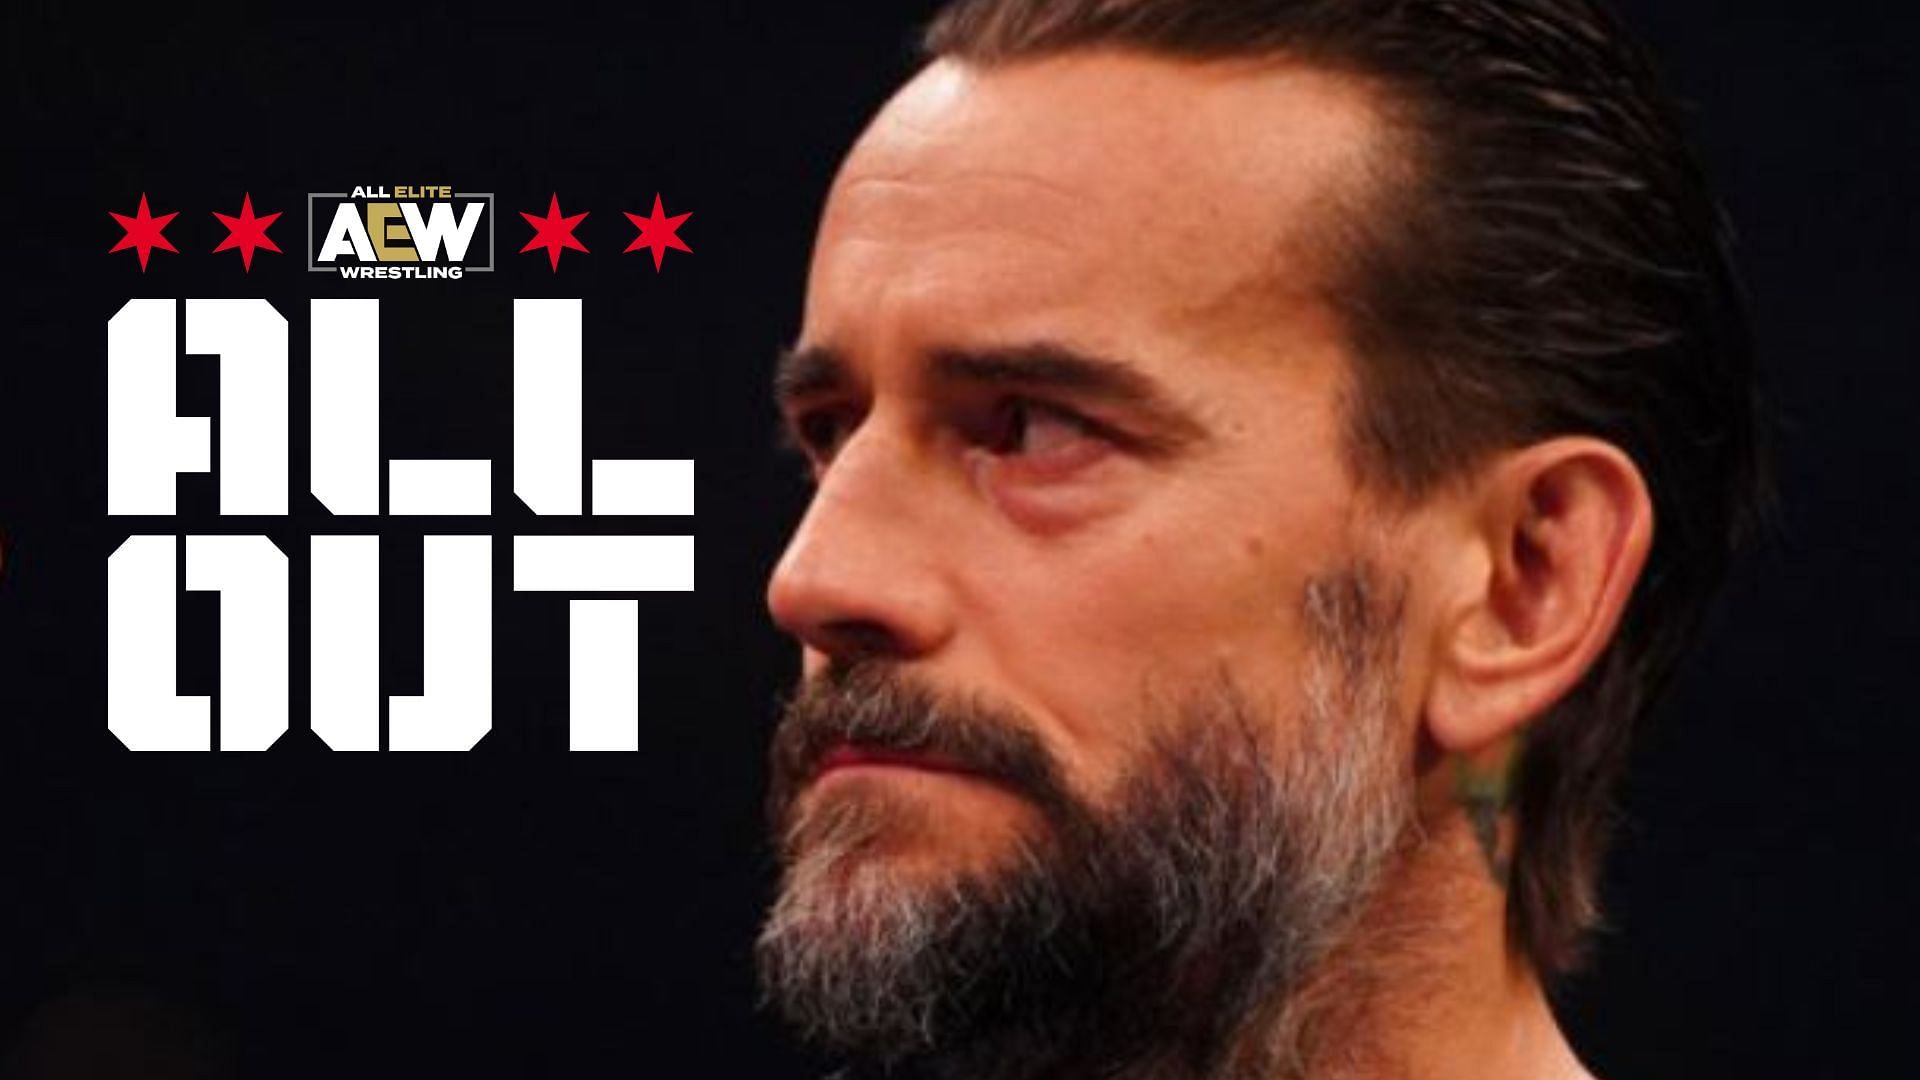 There has been another development in the CM Punk story